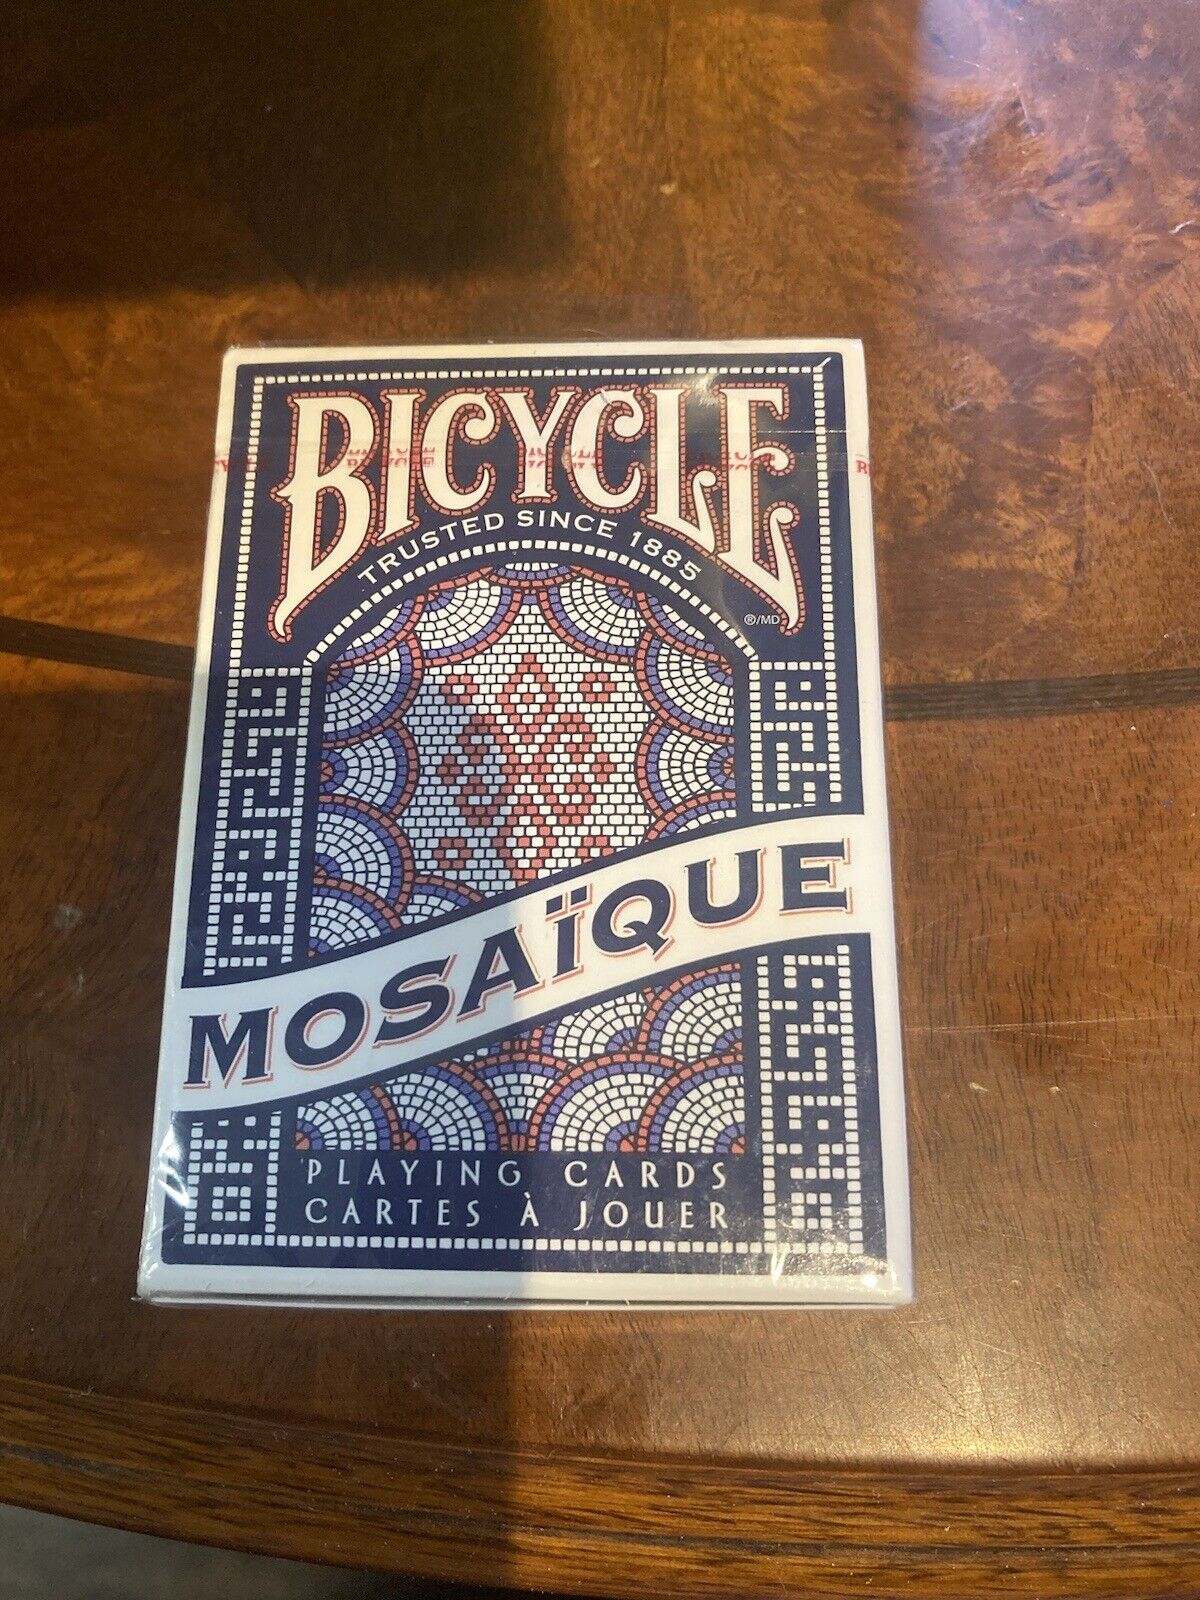 Playing Card Deck, Bicycle Mosaique, Mosaic Tiles Design, Sealed.